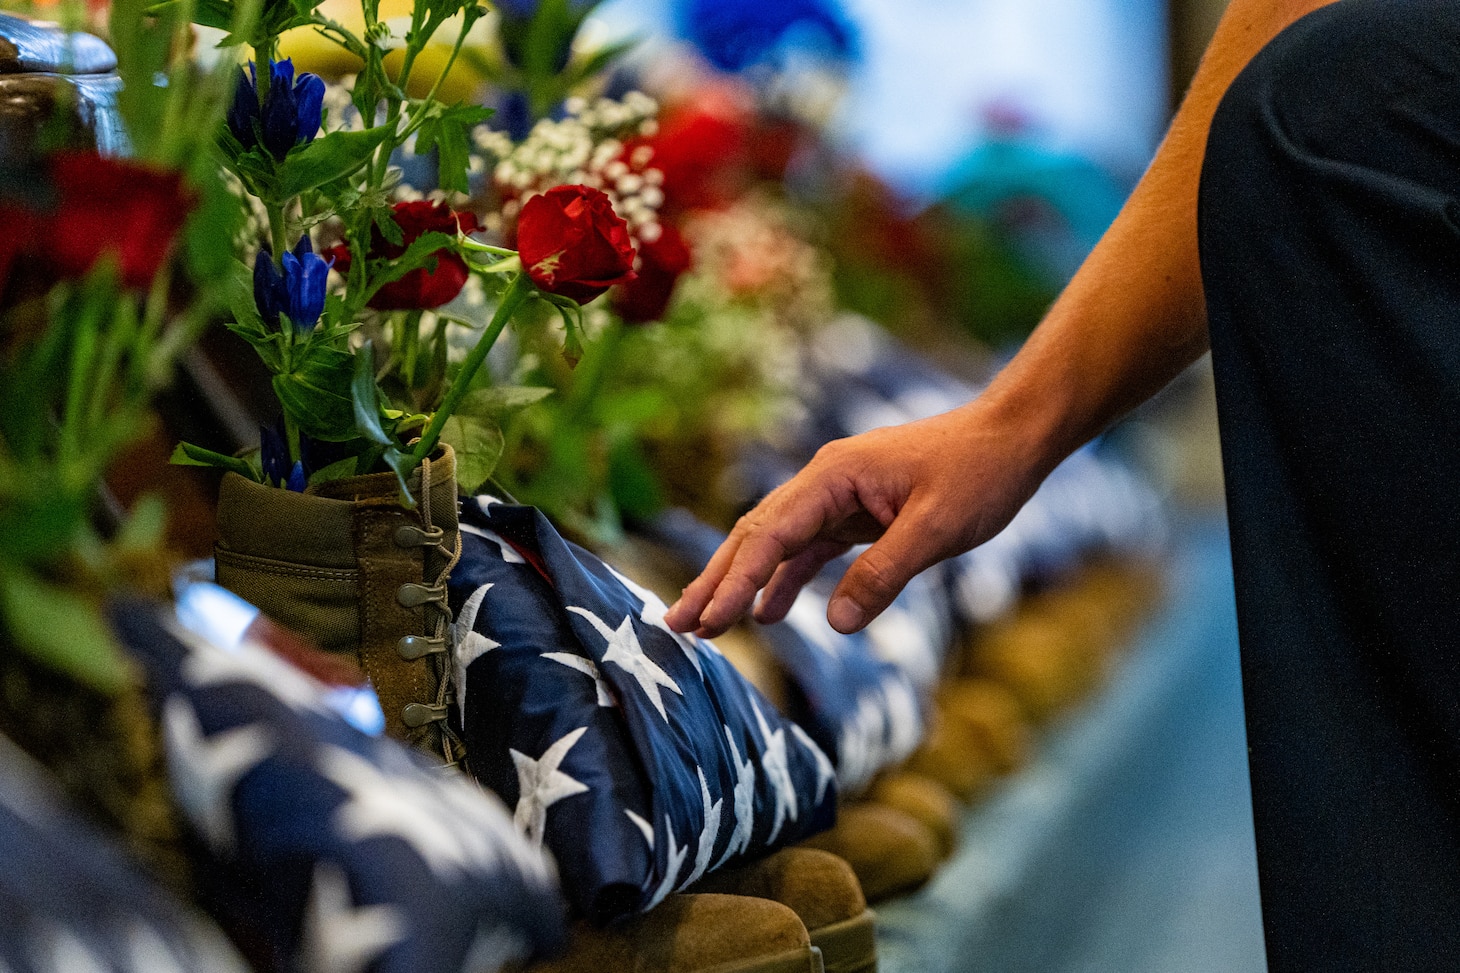 The Camp Foster Chapel hosts a memorial service for the 13 service members who were killed in action in Kabul, Afghanistan on Camp Foster, Okinawa, Japan, Sept. 3, 2021.